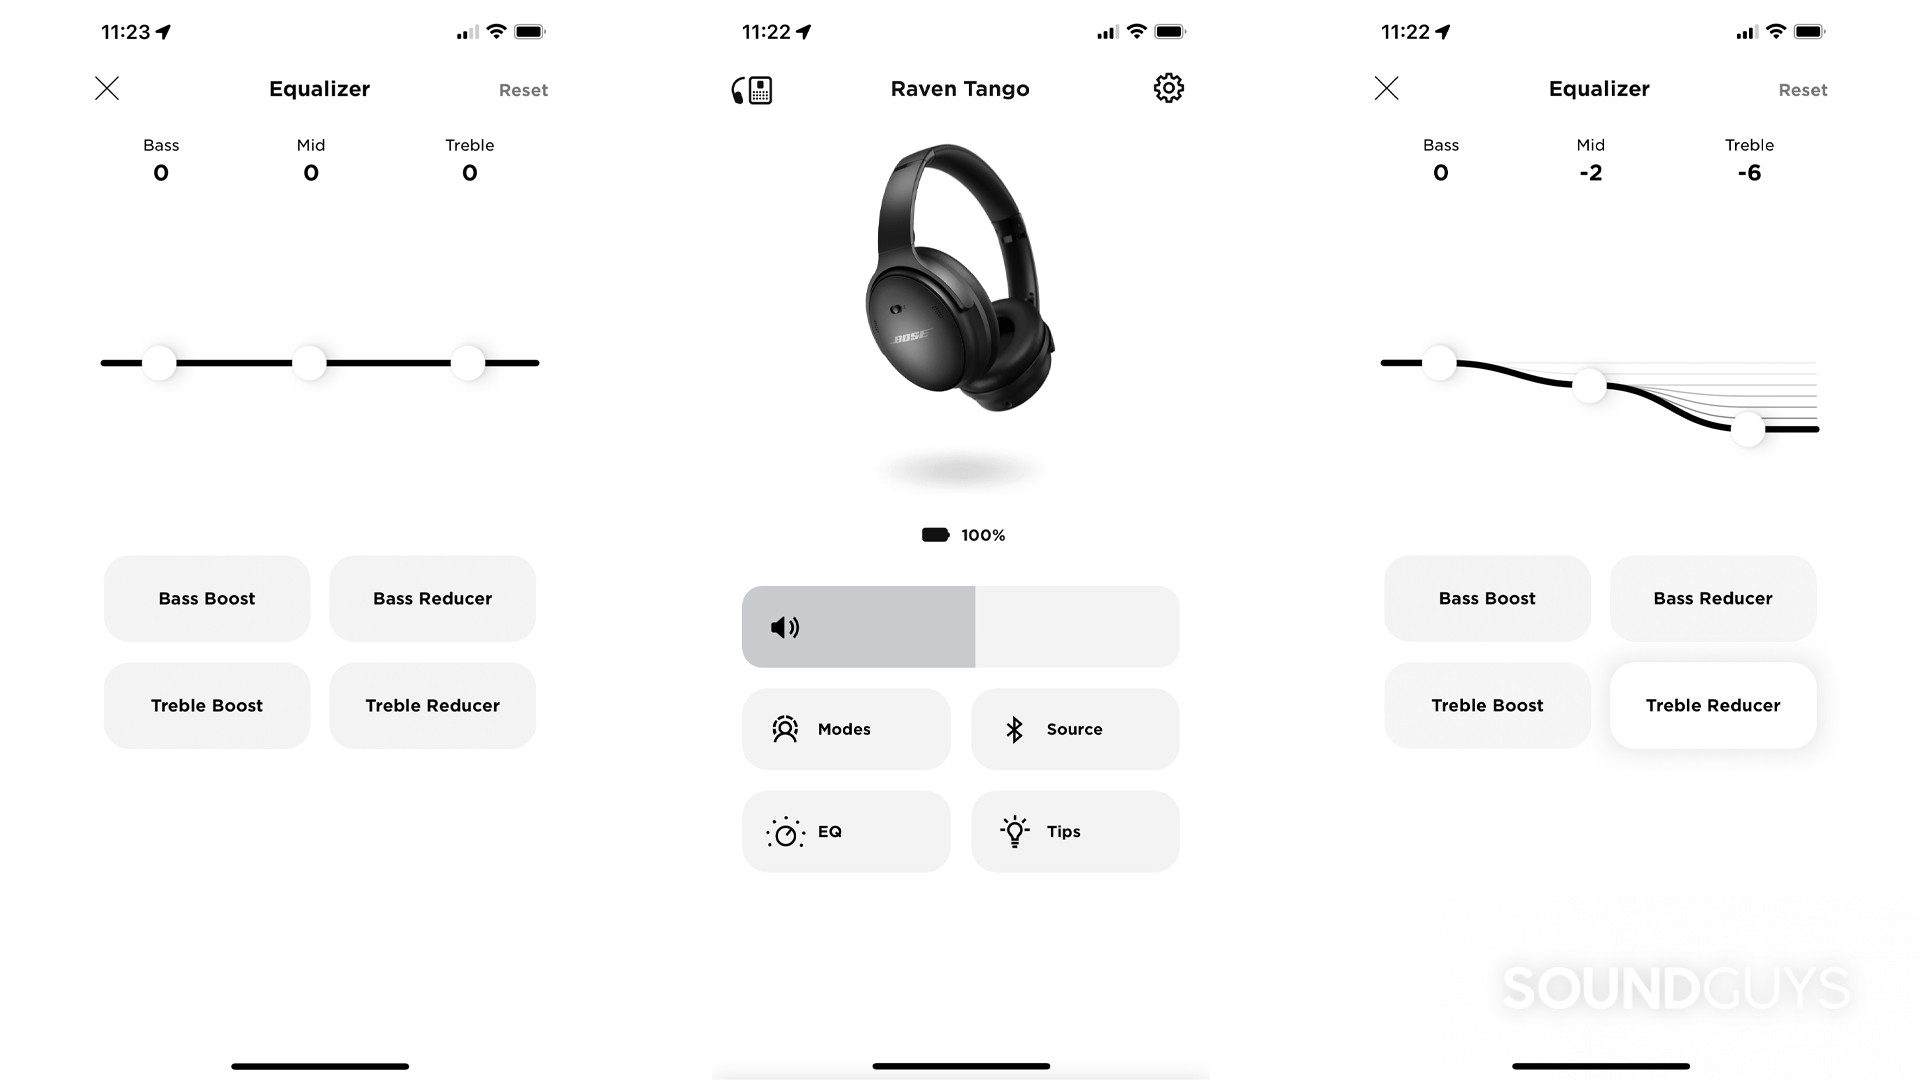 Three screenshots of the February 2022 update of the Bose Music app with the Bose QuietComfort 45 connected showing from left to right a neutral EQ, the home screen with a new EQ button visible, and the EQ with Treble Reducer activated.